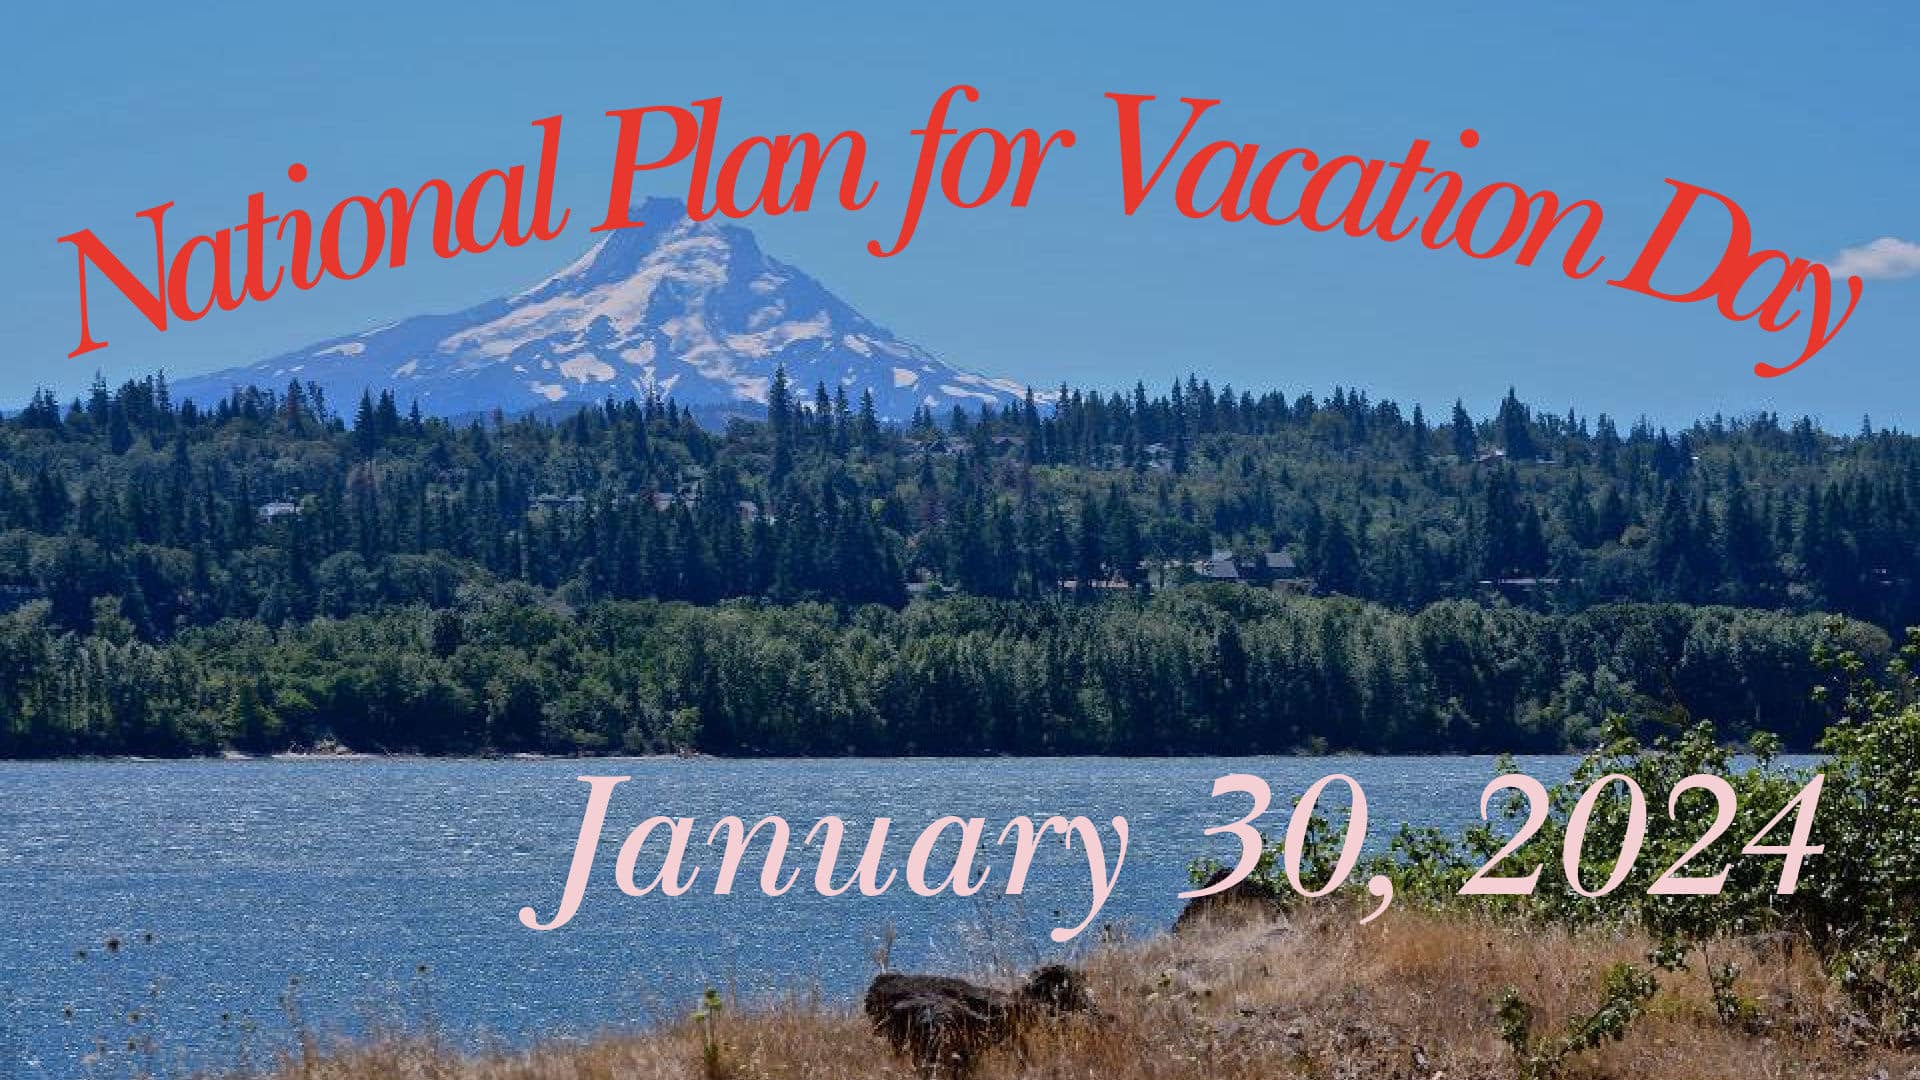 Mt Hood and the Columbia River Gorge welcome you for National Plan for Vacation Day 2024